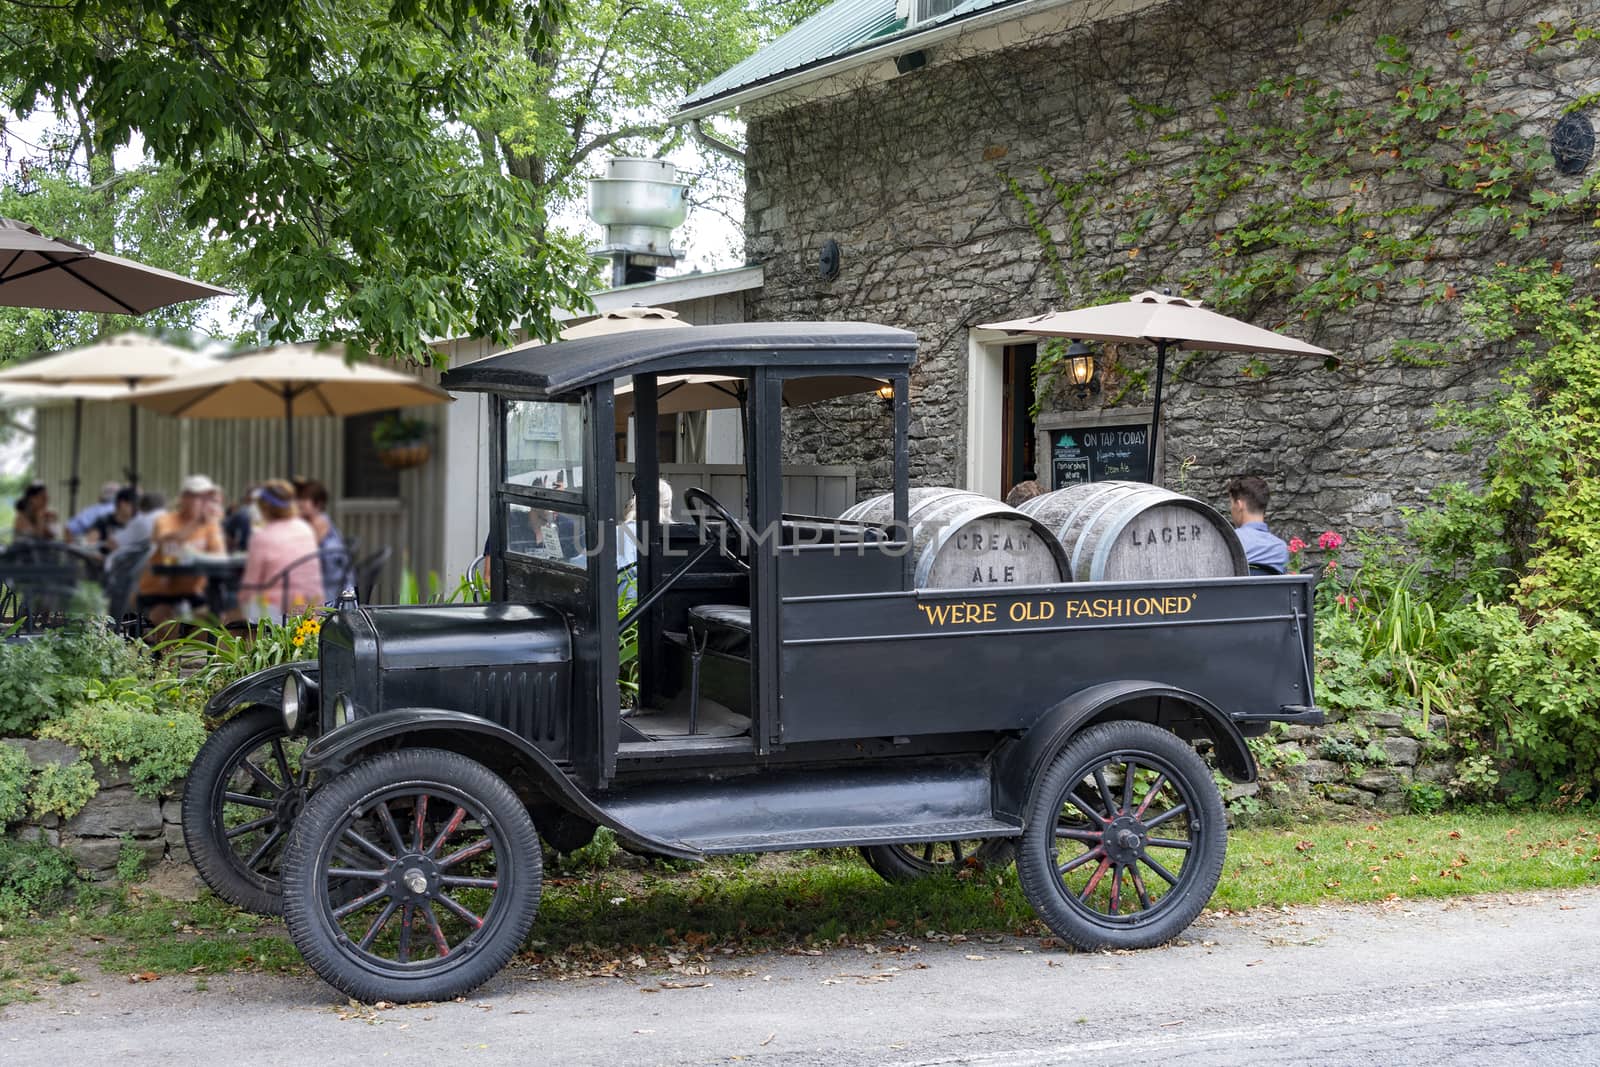 An ancient Truck with two barrels of beer as a brand name stands near the pub